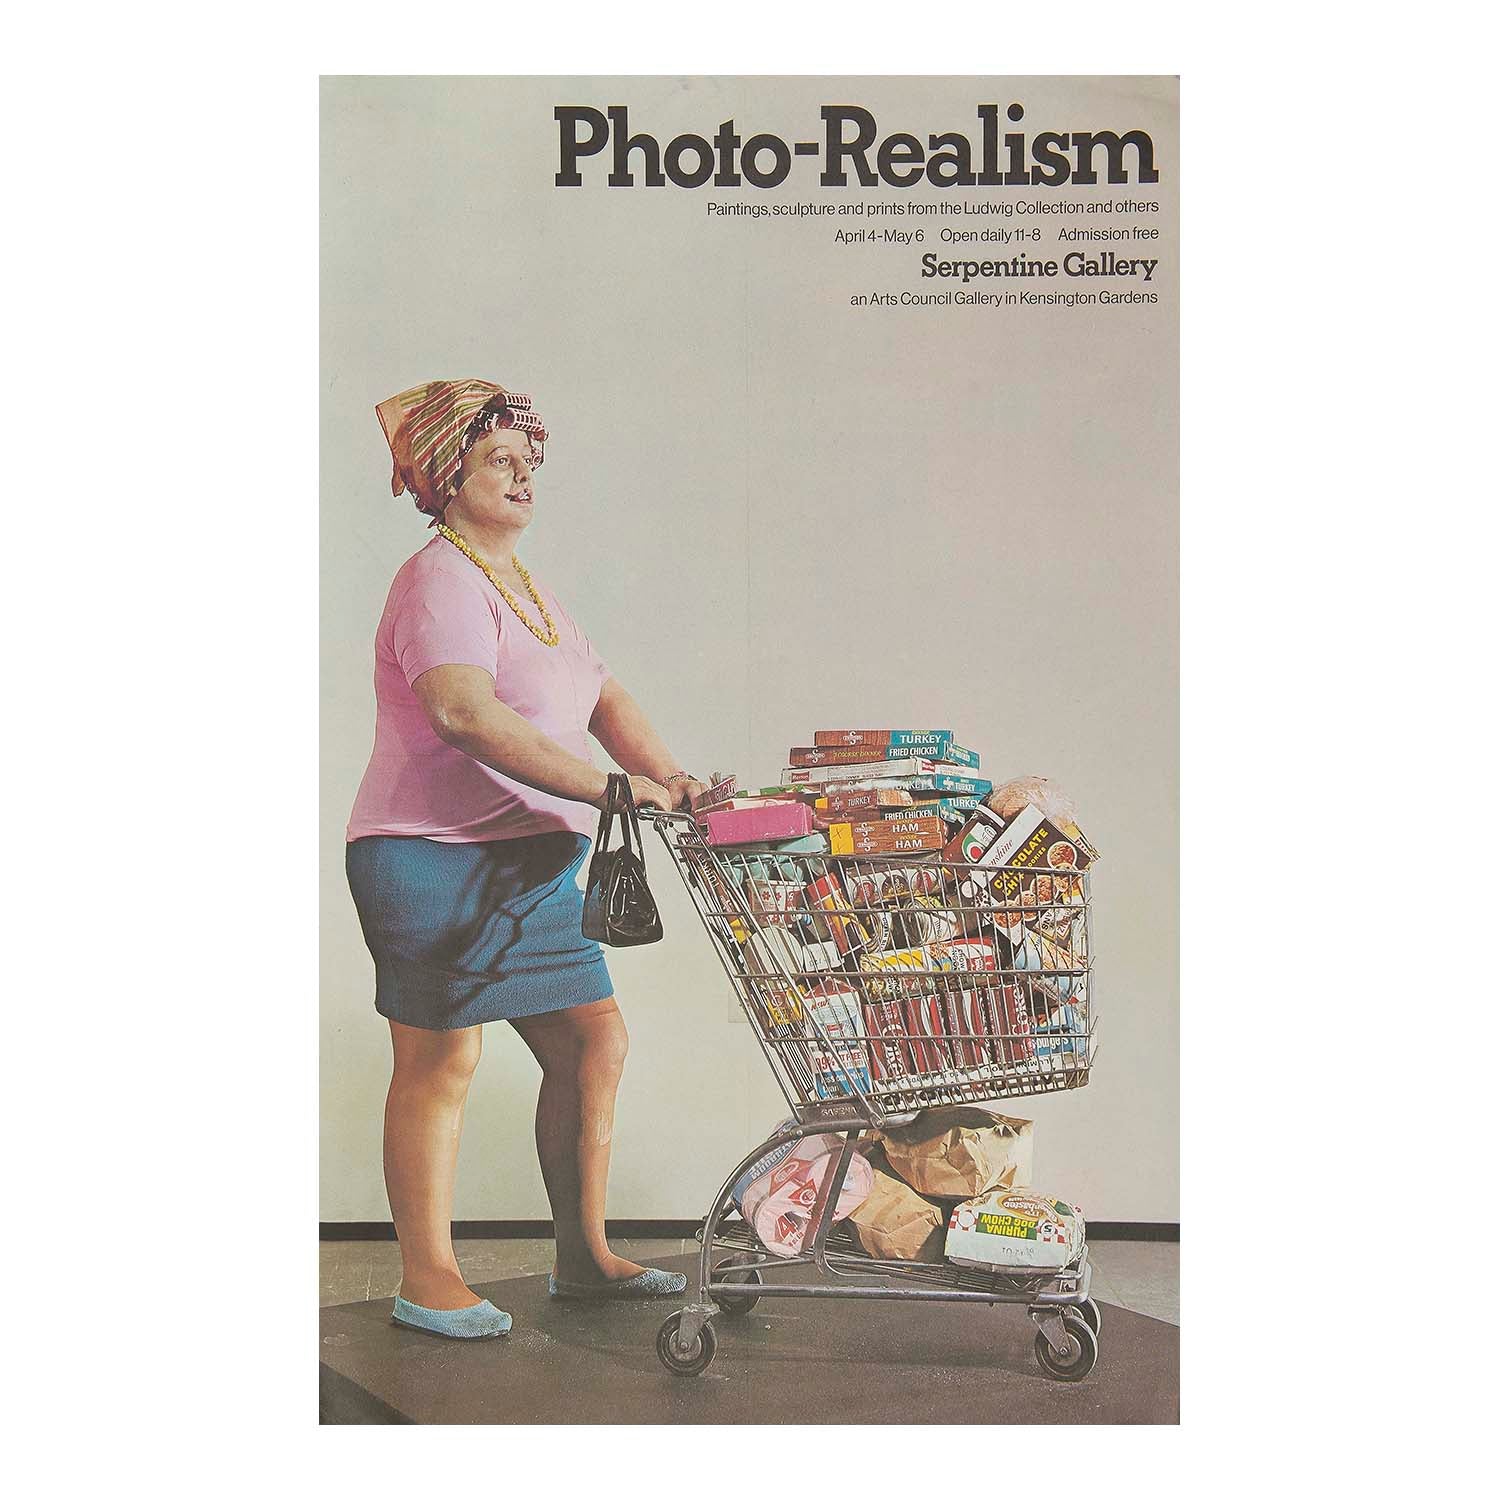 Photo-Realism. Paintings, sculpture and prints from the Ludwig Collection and others